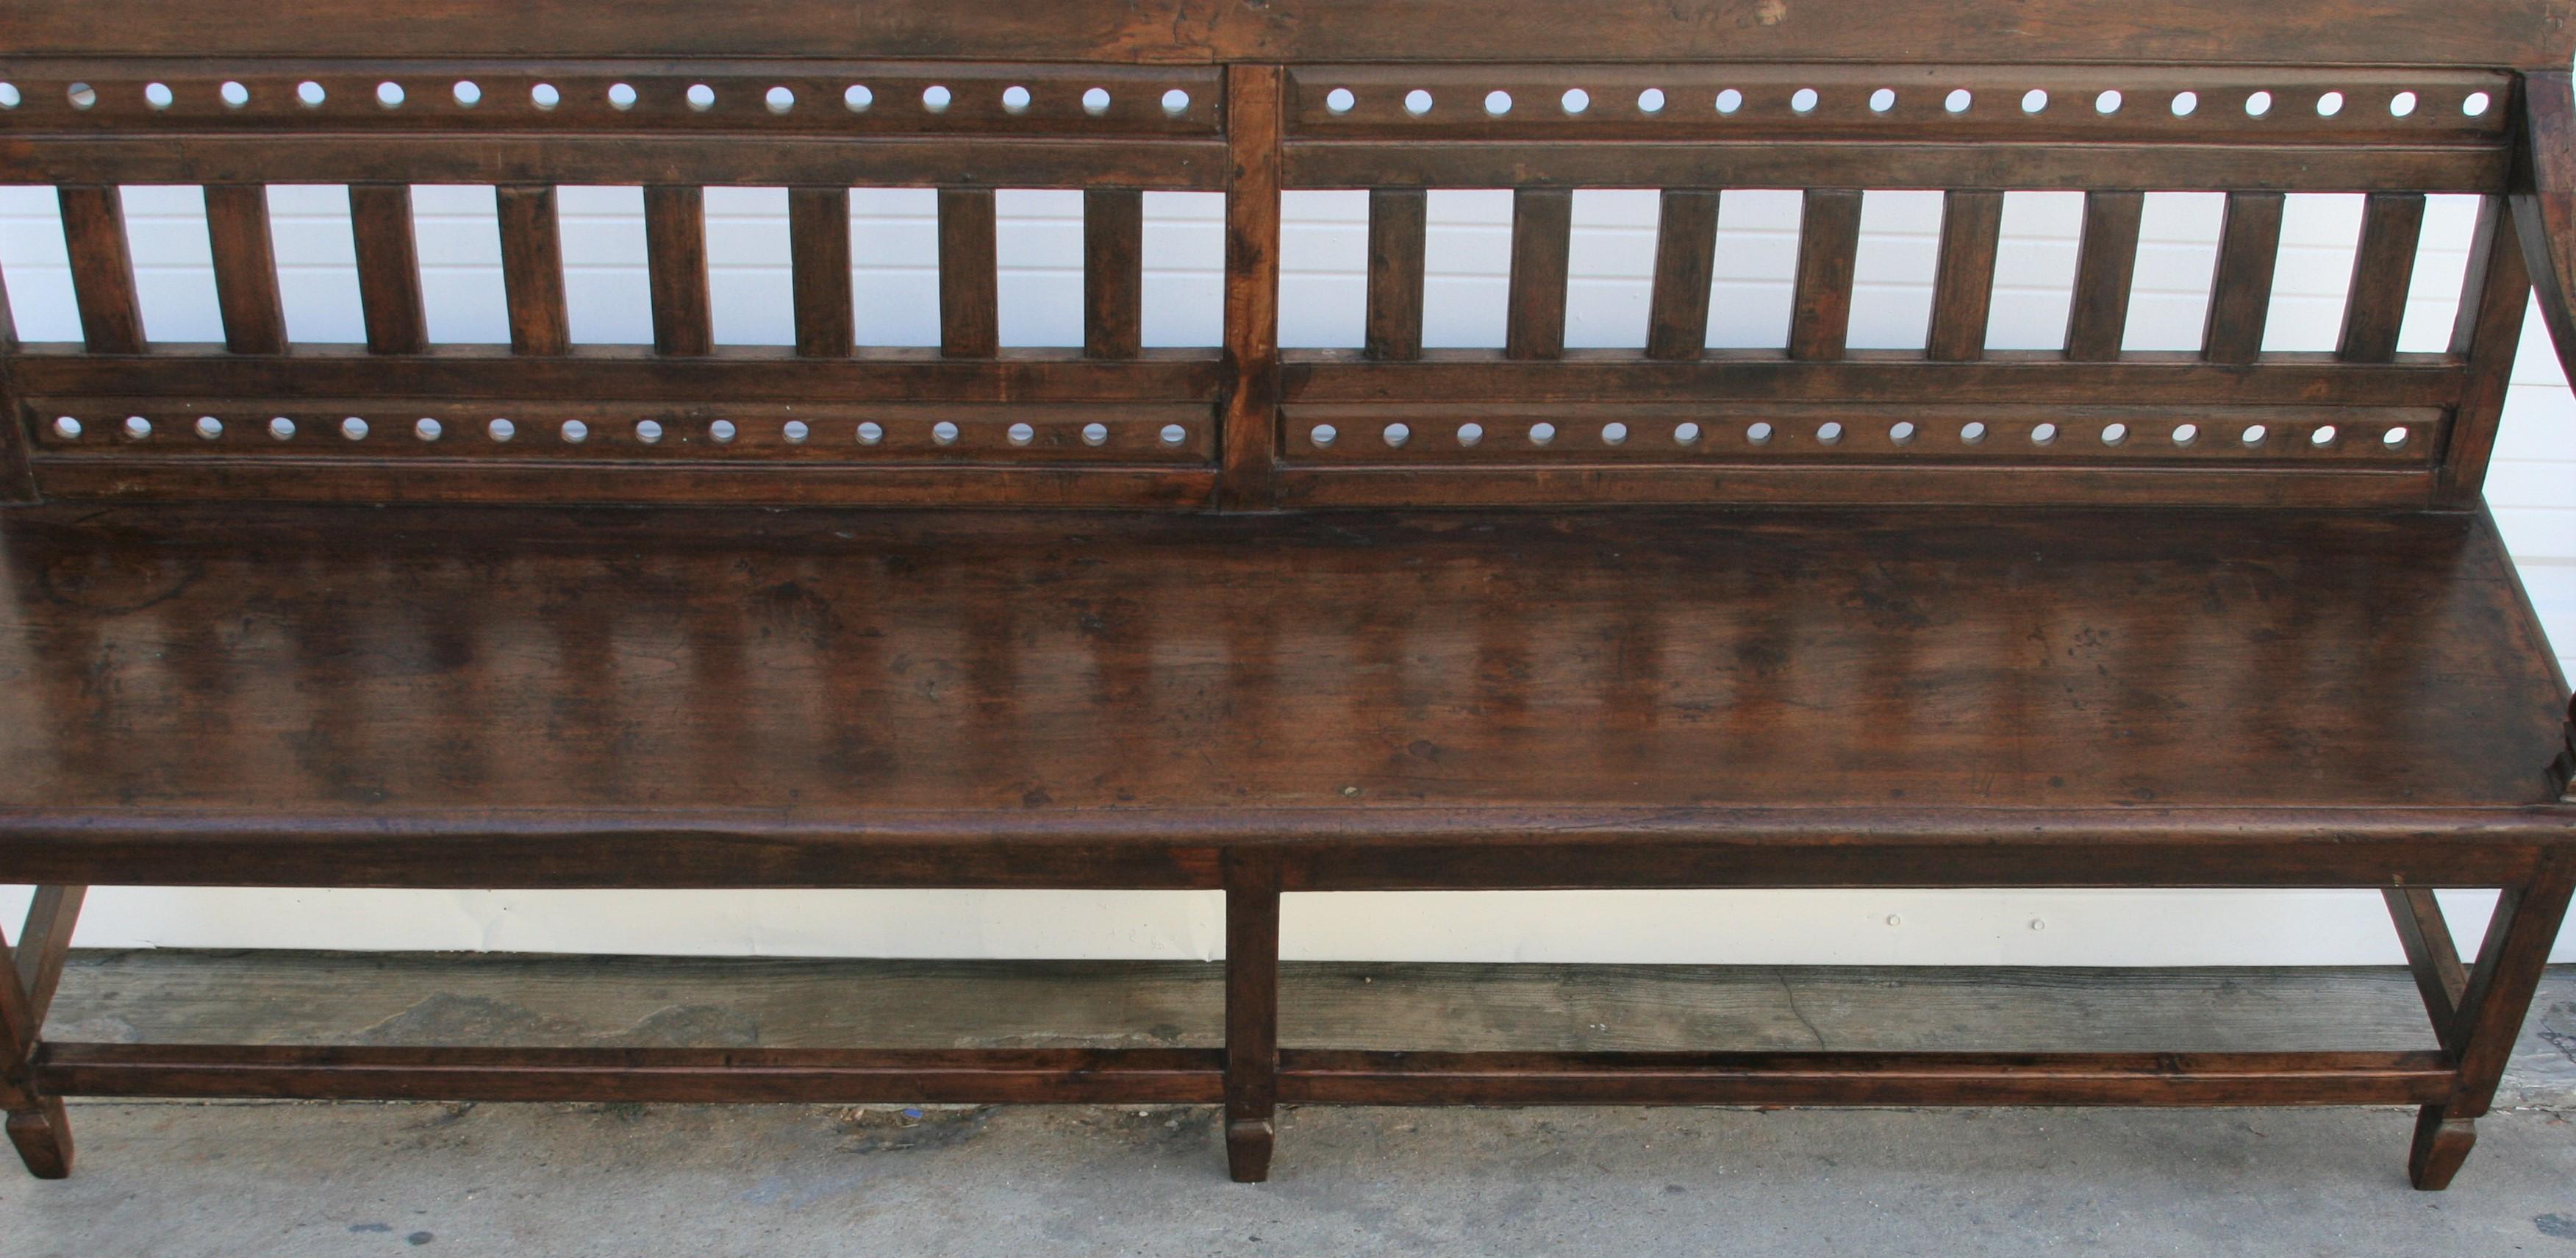 Classic Example of a Colonial Era Bench from the British Empire For Sale 4